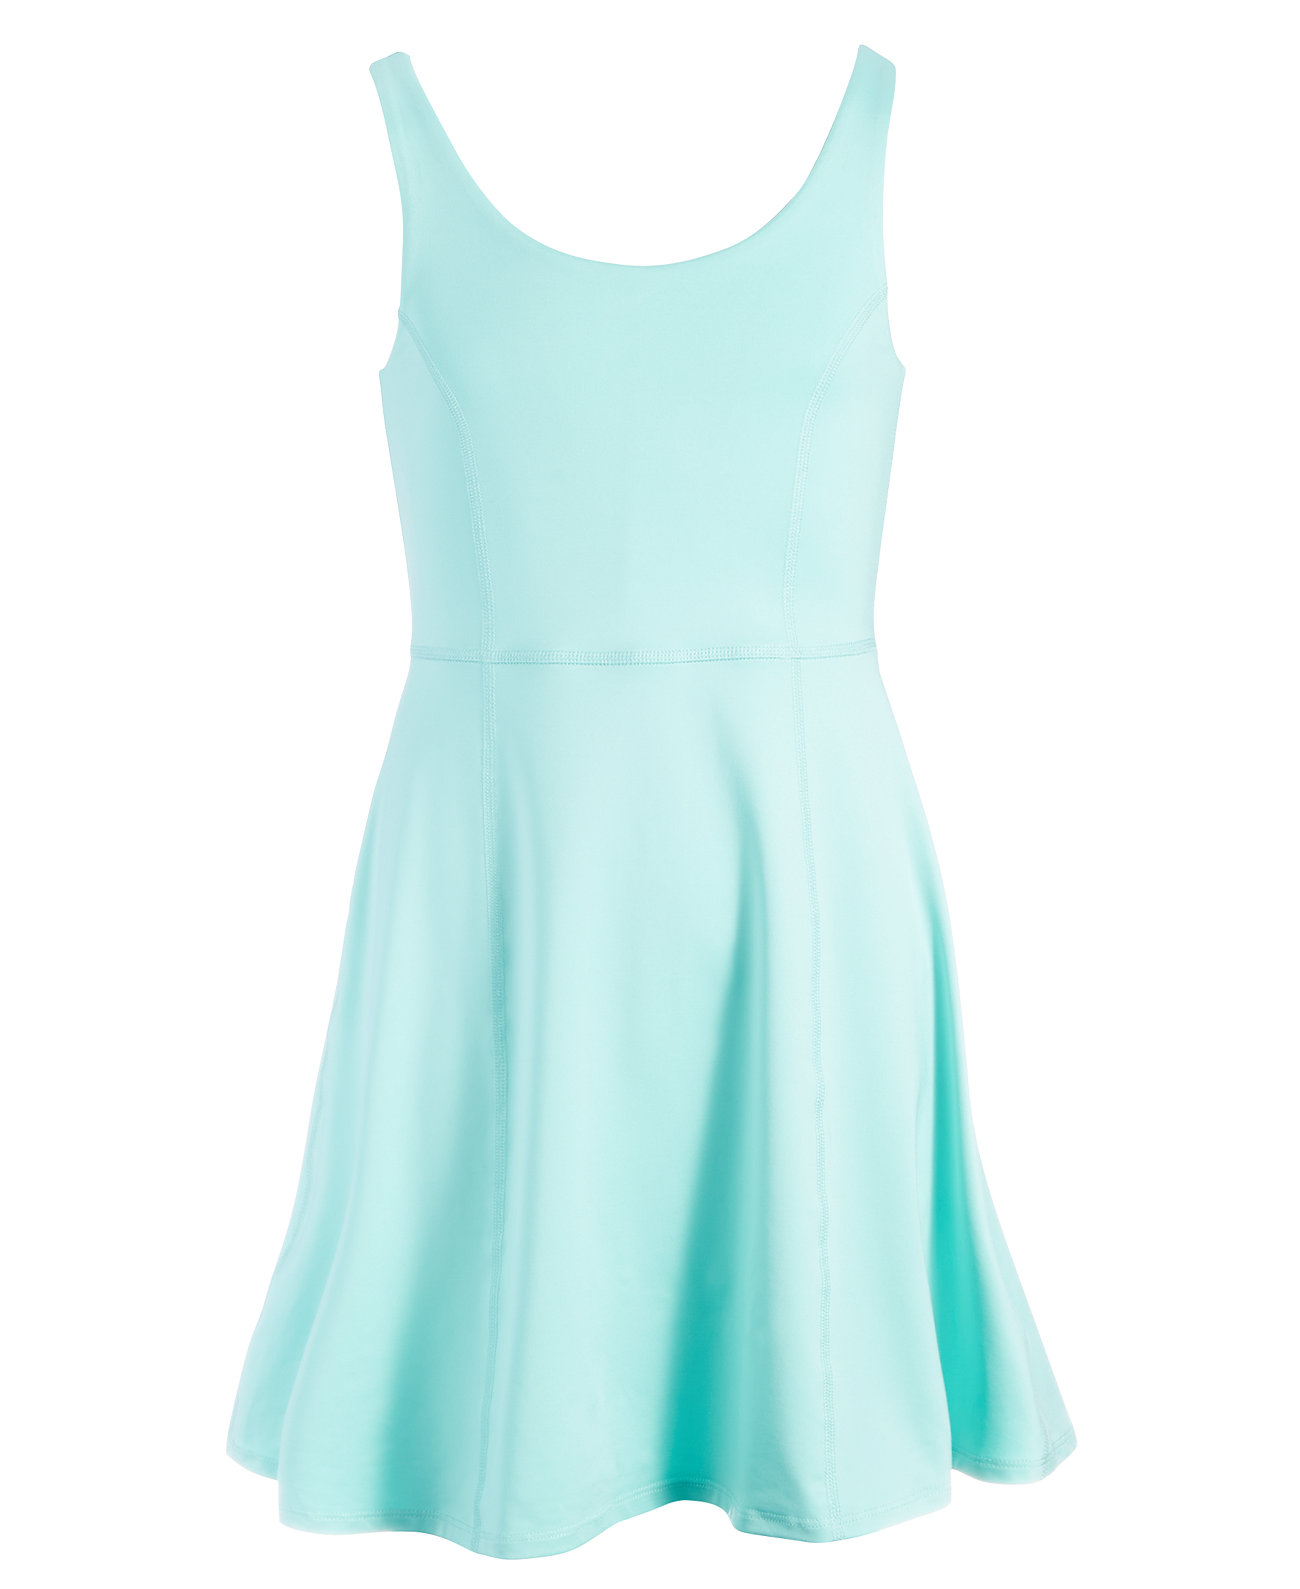 Big Girls Solid Flounce Active Sleeveless Dress, Created for Macy's ID Ideology